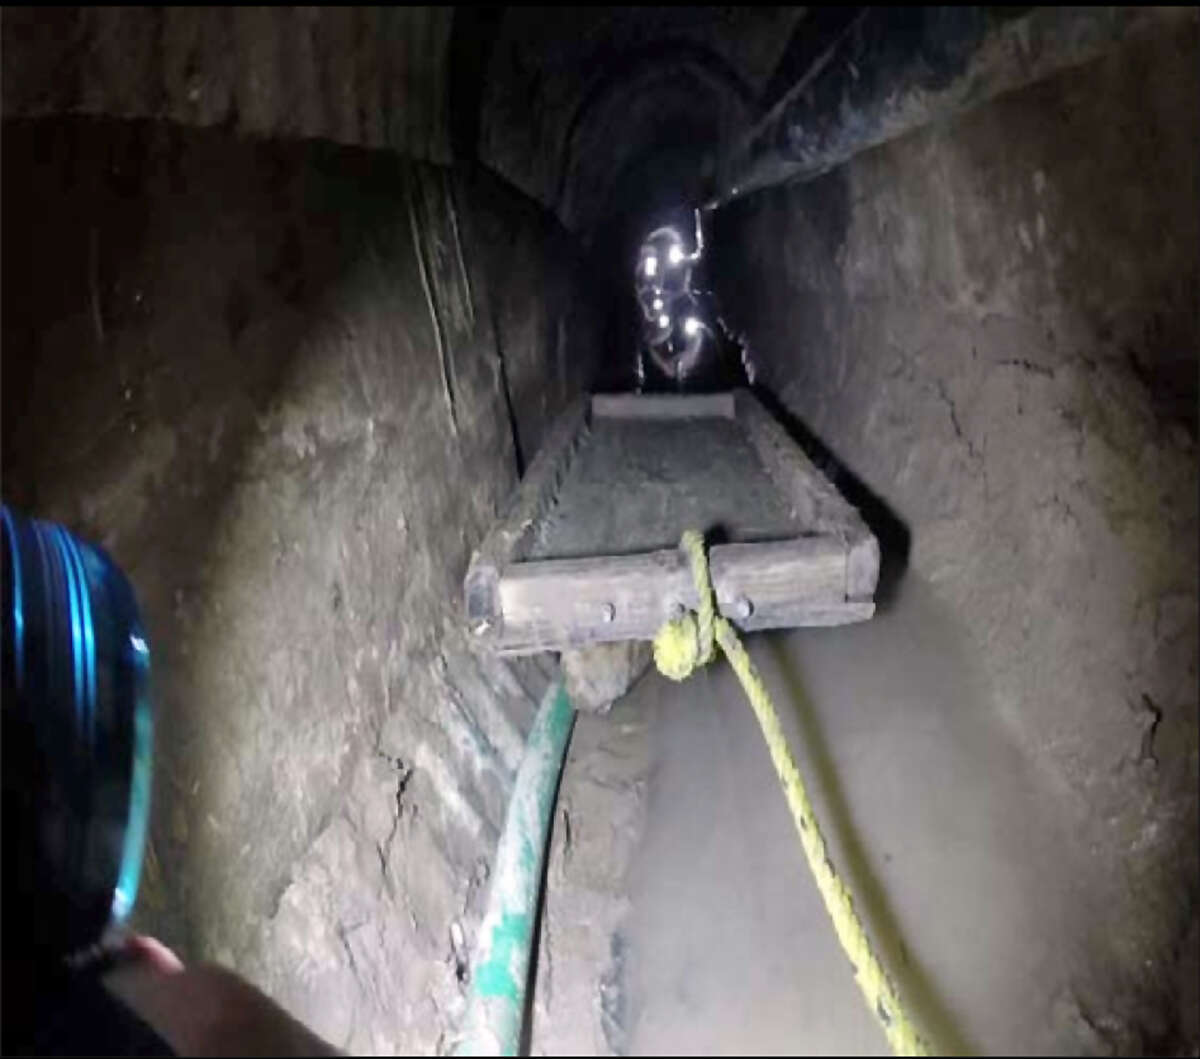 This April 25, 2015 photo, from the U.S. Border Patrol and introduced as evidence in U.S. District Court, shows a trolley in the Mexican side of a tunnel that Border Patrol agents said was used by Evelio Padilla. a Honduran national, to smuggle over 50 pounds of cocaine into the U.S. Padilla pleaded guilty Wednesday, Aug. 19, in federal court in San Diego to one count of possession of drugs with intent to distribute. (U.S. Border Patrol via AP)